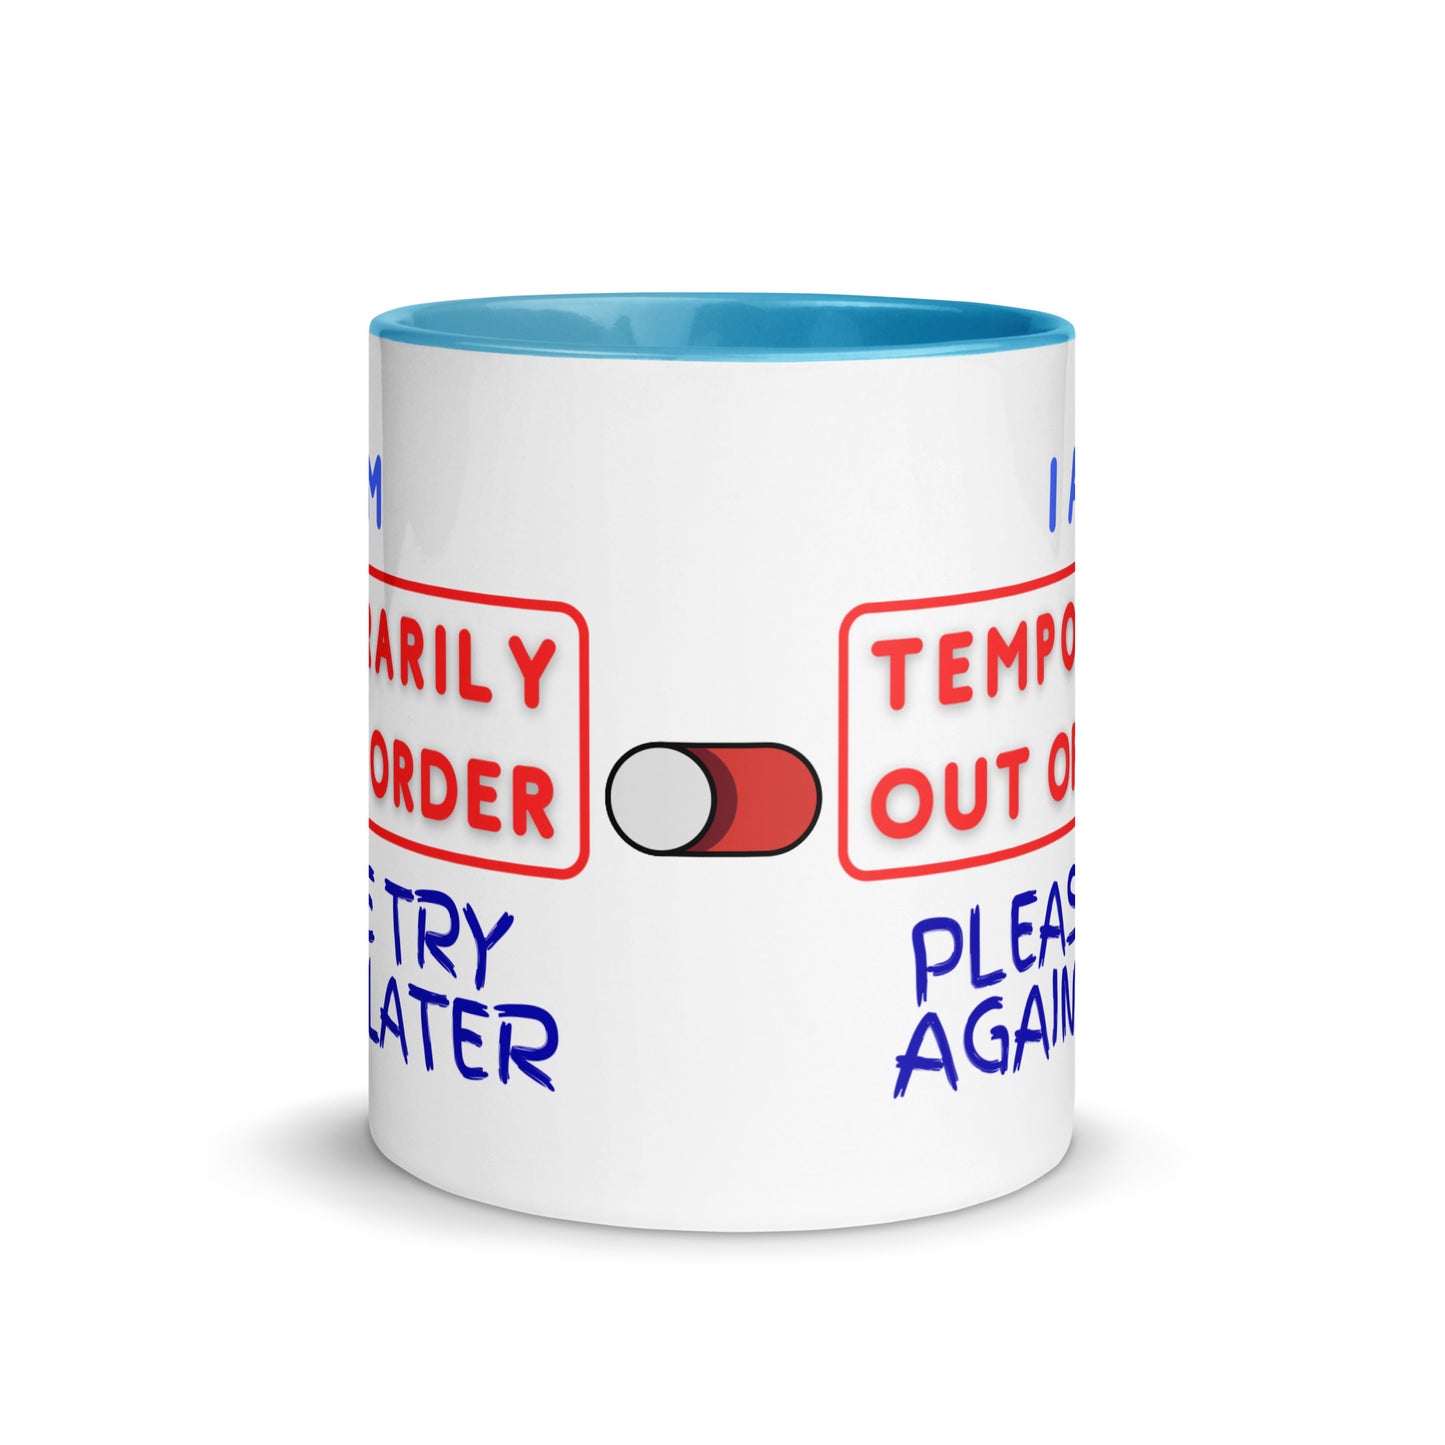 Mug with Color Inside - Temporarily Out of Order